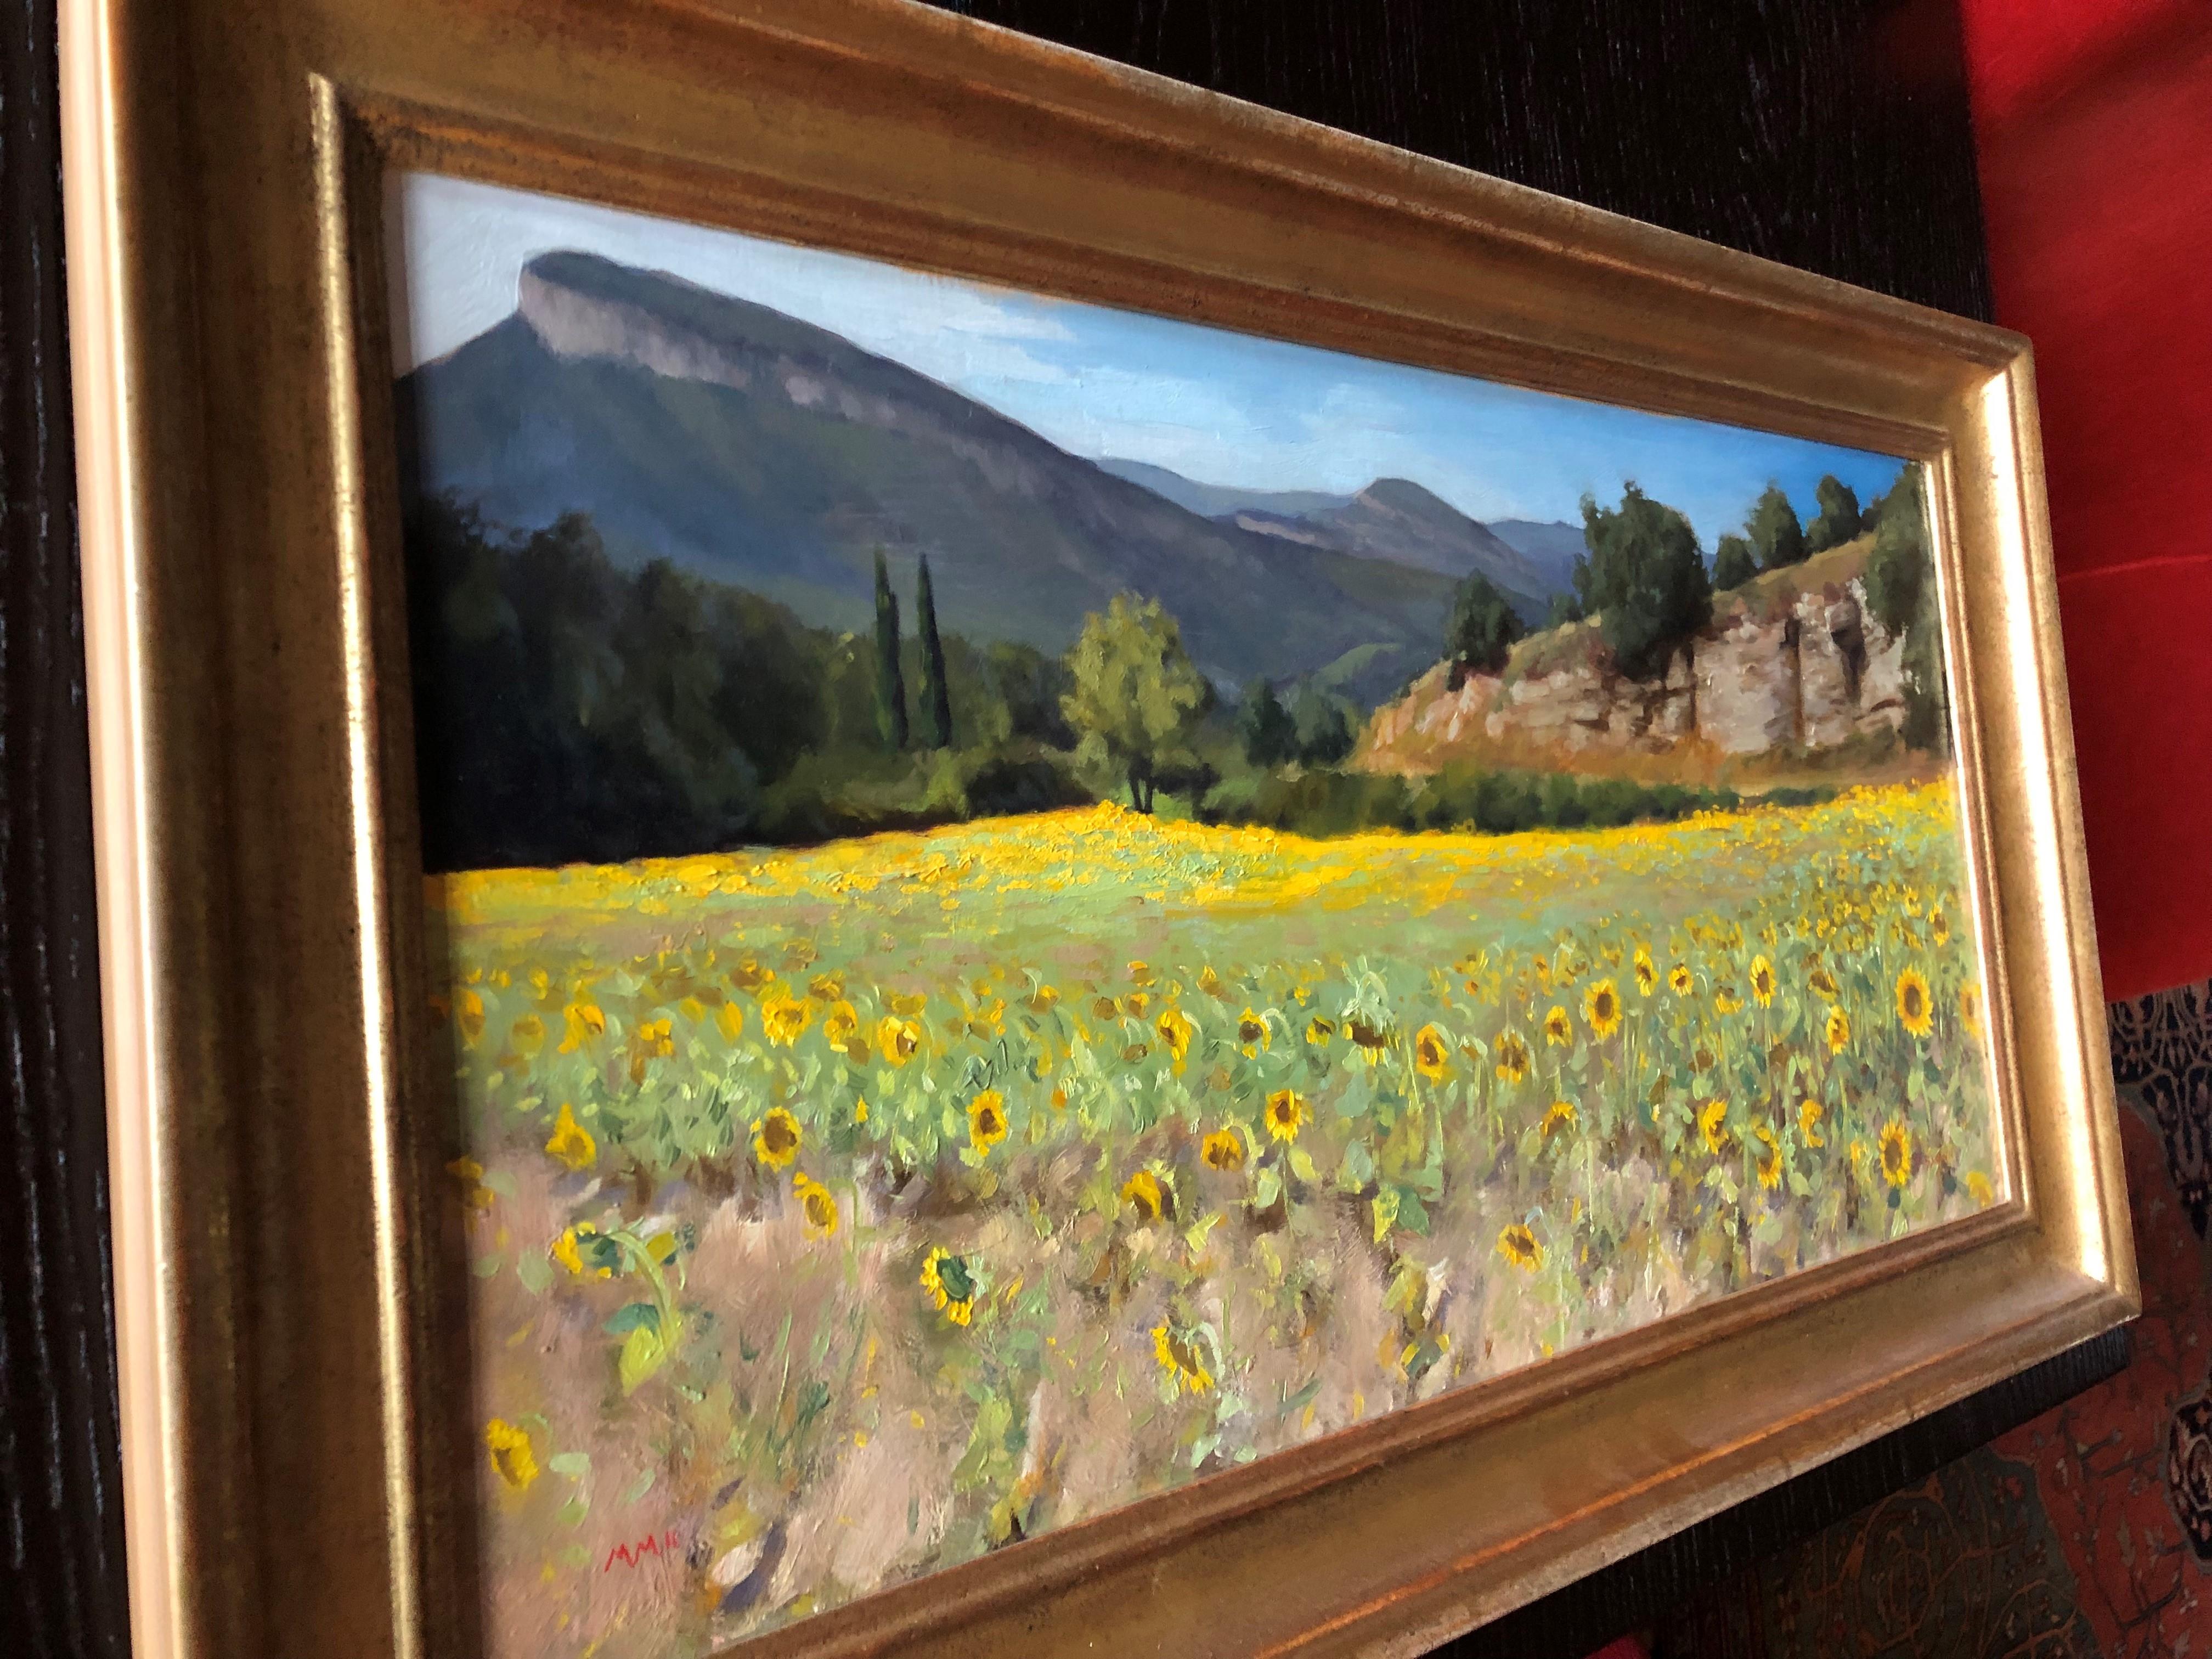  Sunflowers Rieux en Val  - Painting by Paul BROWN